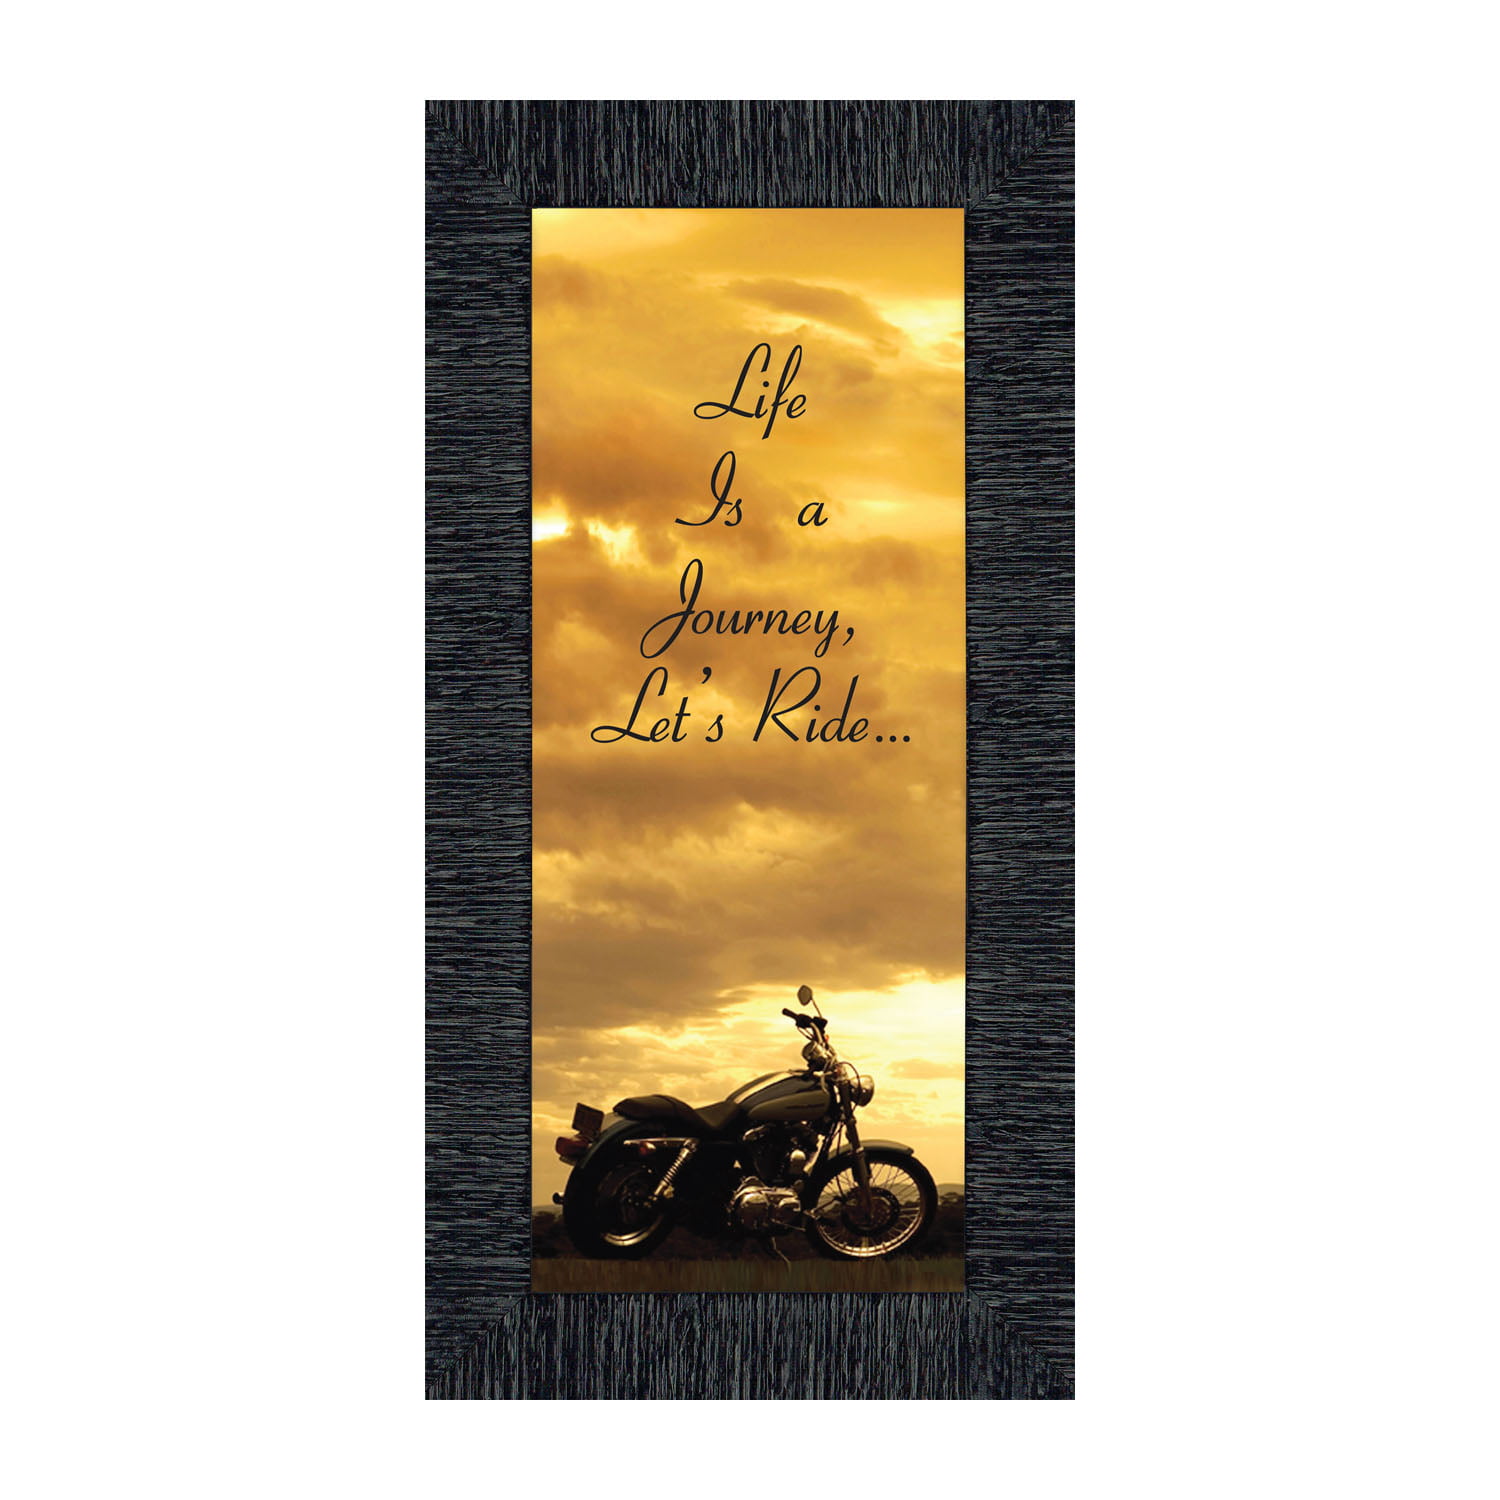 Harley Davidson Gifts For Men And Women Classic Harley Picture Frame Harley Davidson Wedding Gifts Biker Motorcycle Accessories For Men Life Is A Journey Wall Decor 7850 Walmart Com